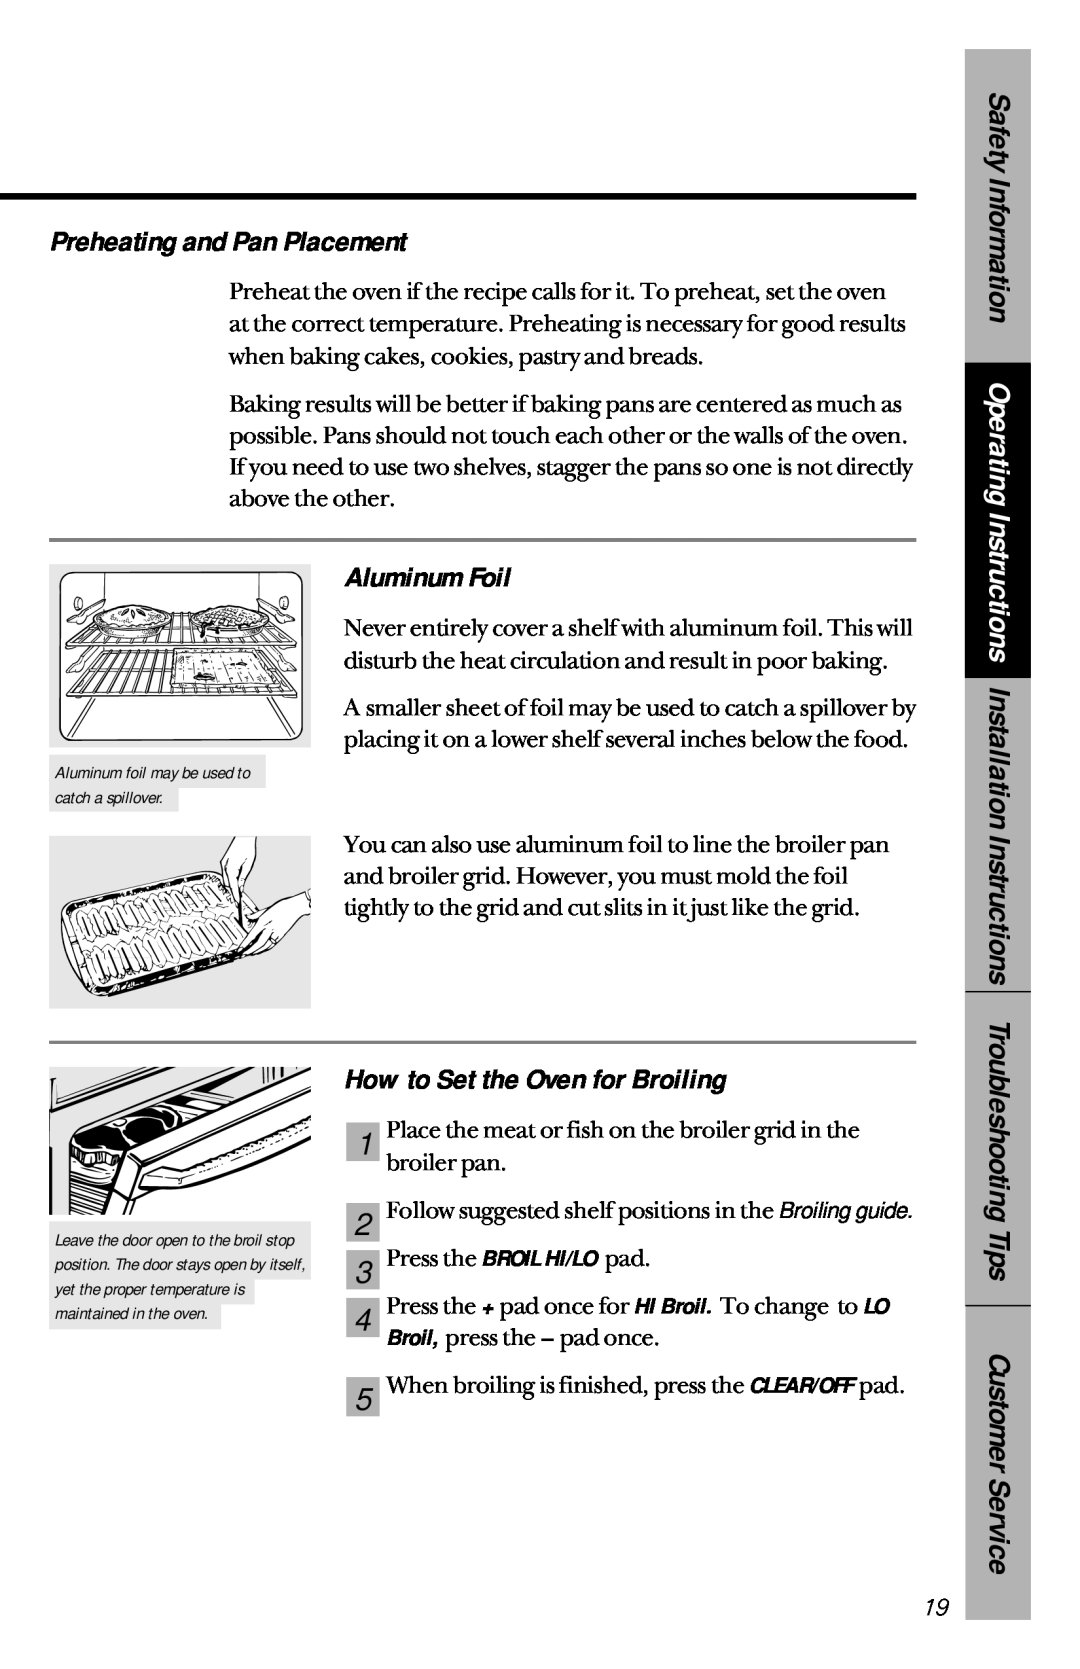 GE 164D3333P033, 49-8779 manual Preheating and Pan Placement, Aluminum Foil, How to Set the Oven for Broiling 